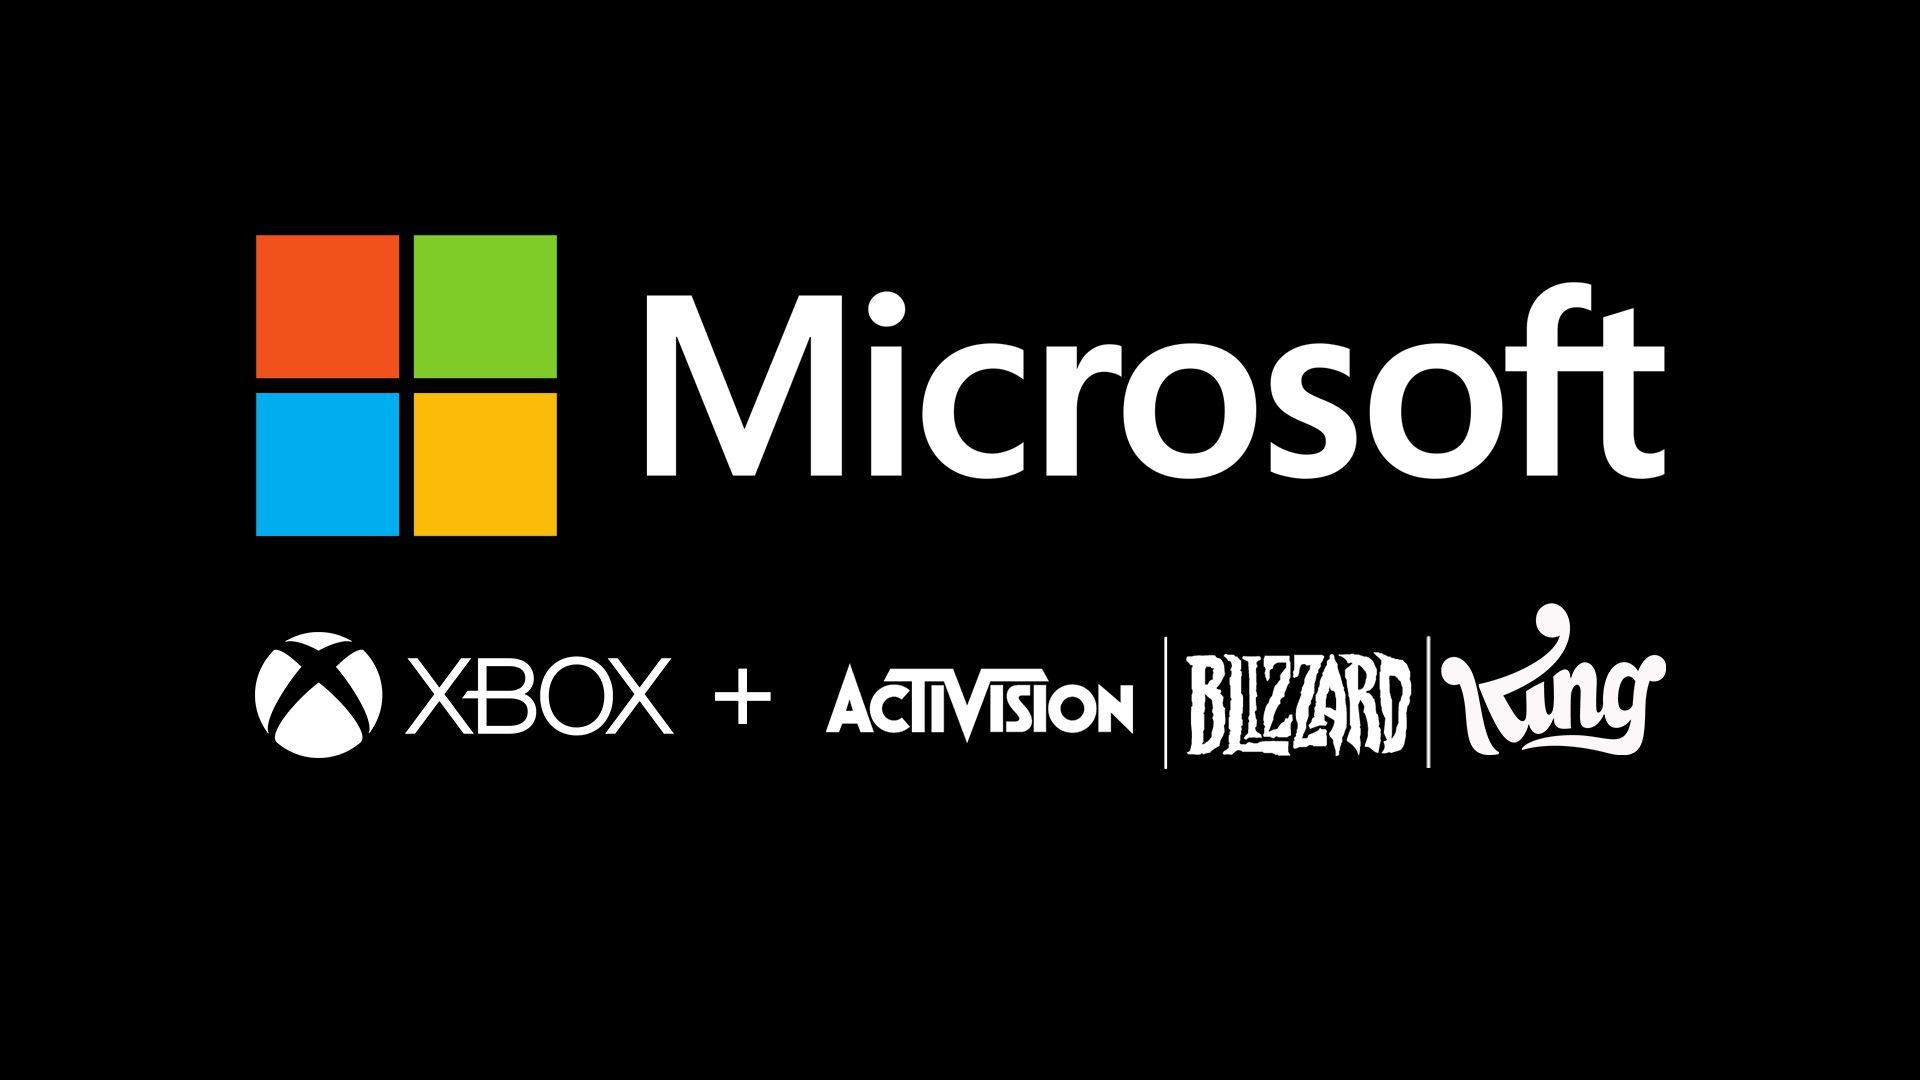 Microsoft Activision deal blocked